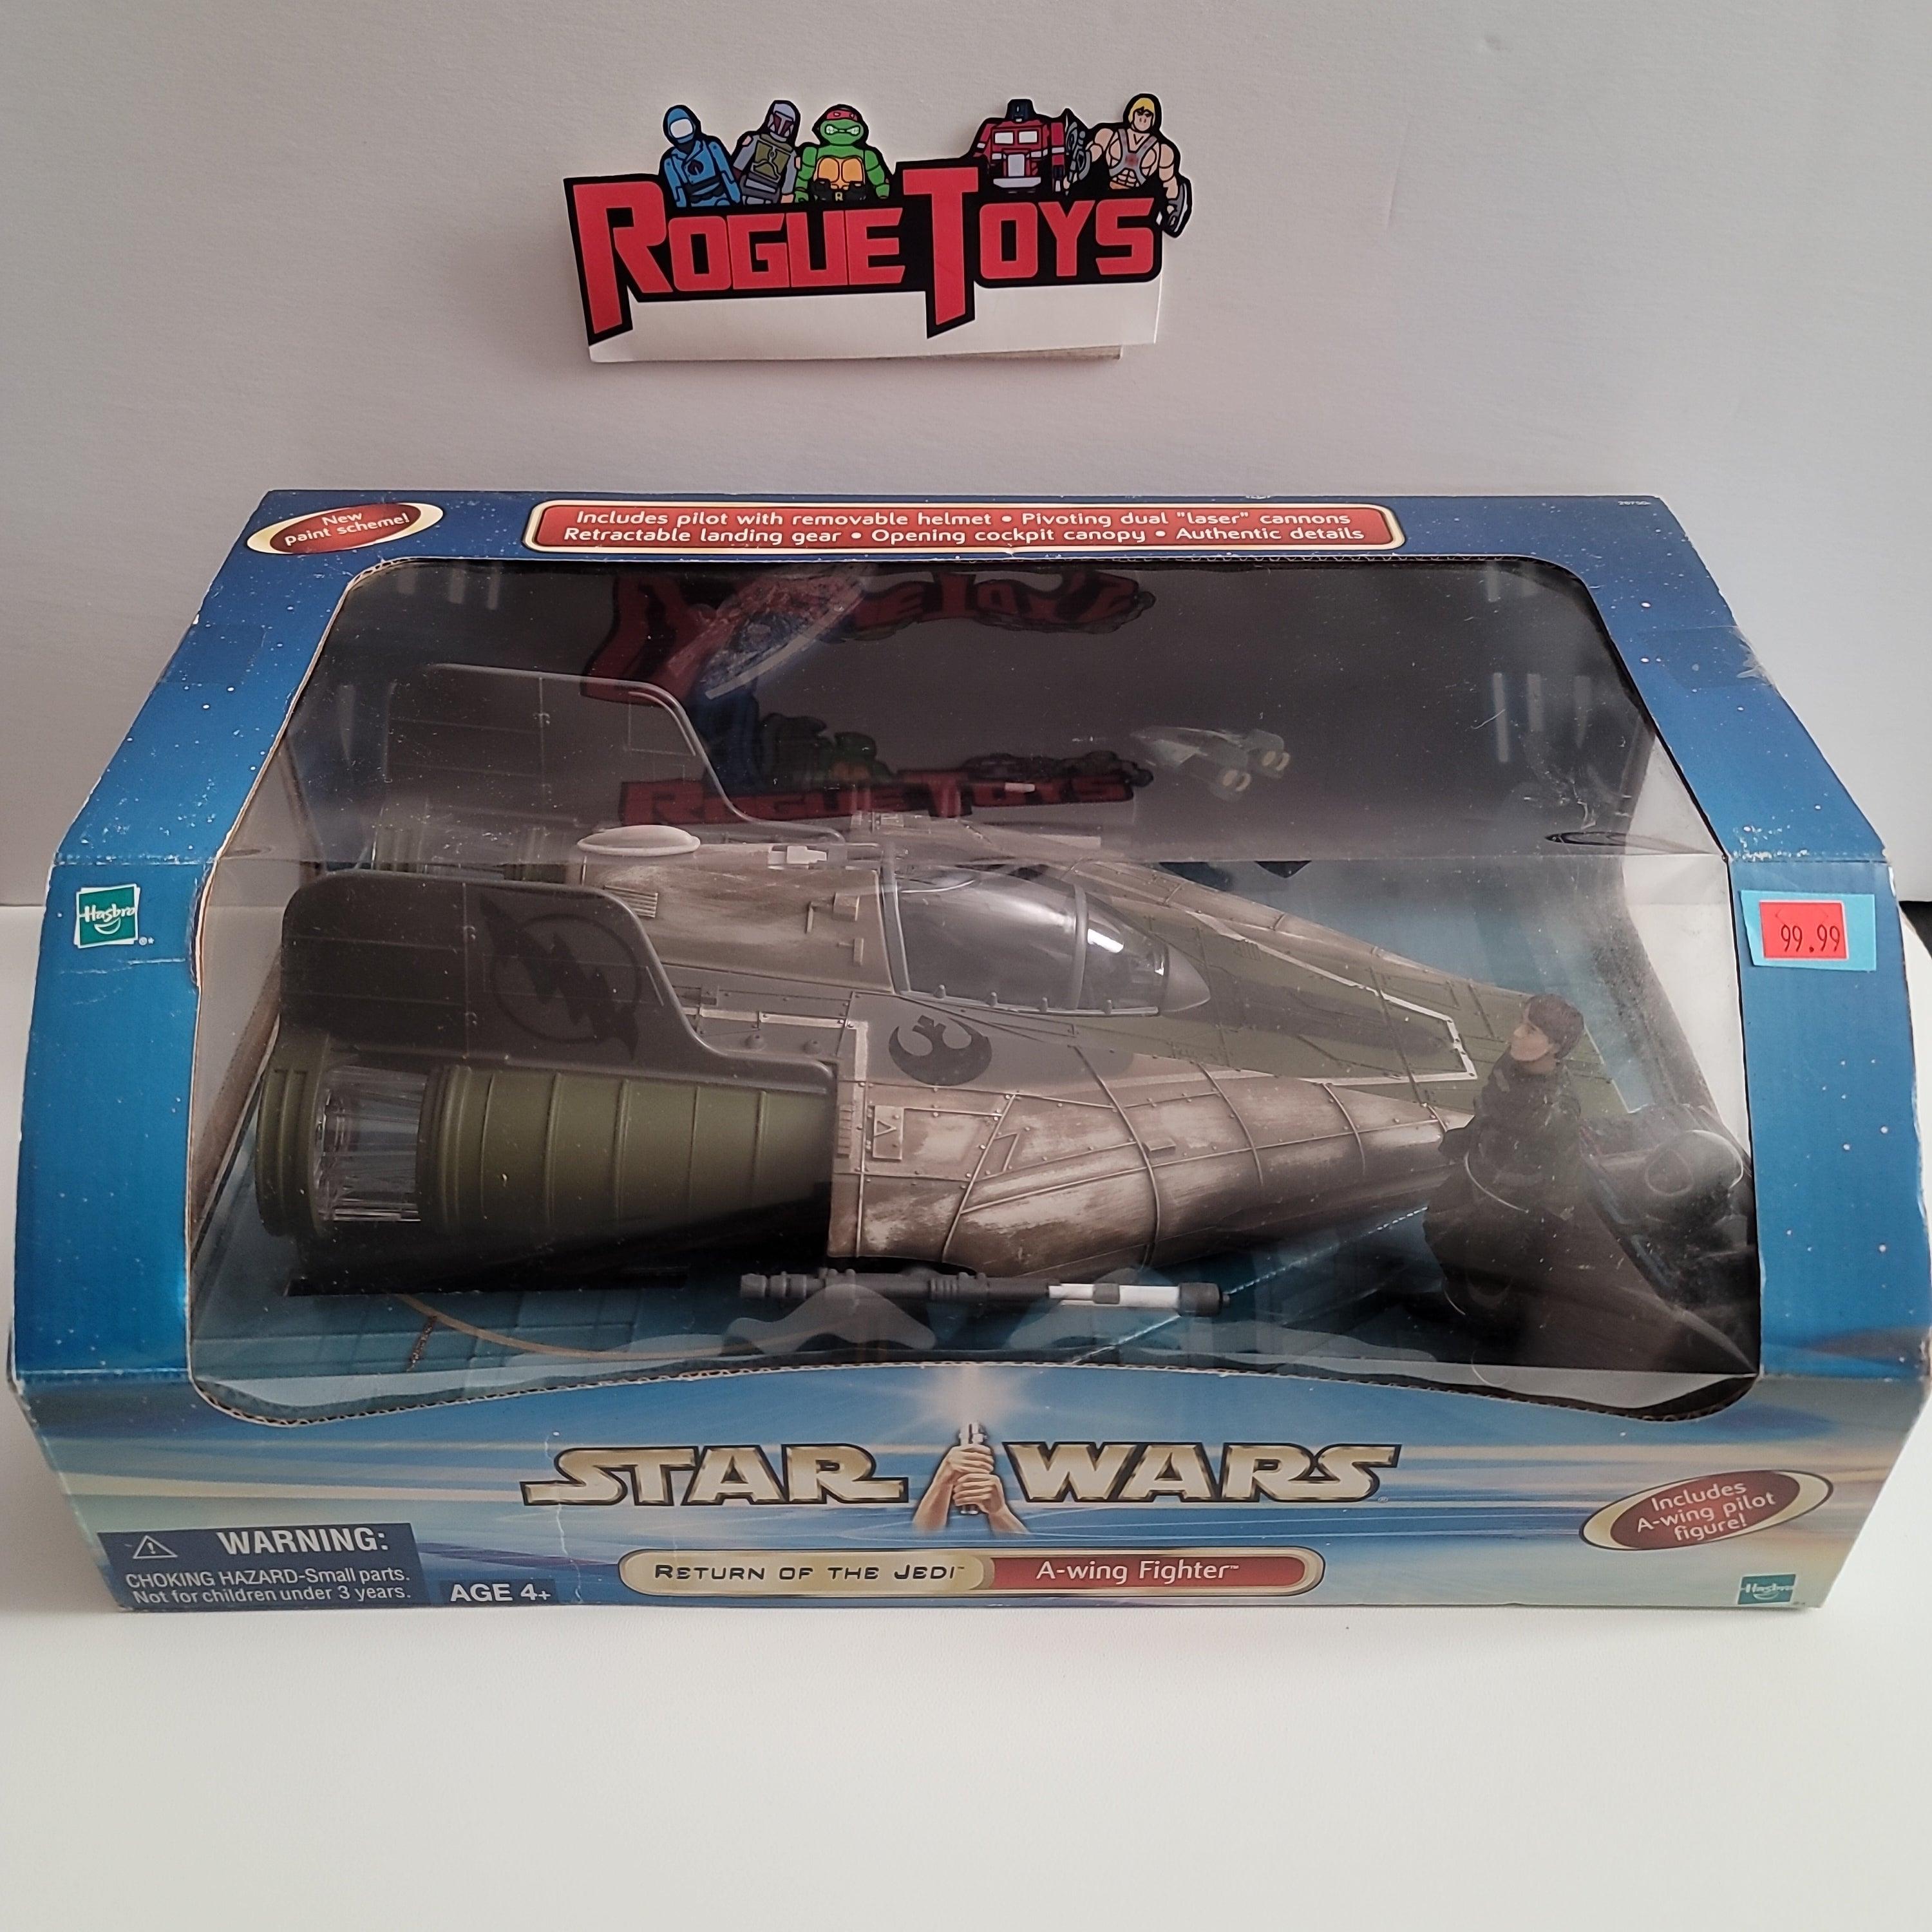 Hasbro Star Wars Return of the Jedi A Wing Fighter - Rogue Toys